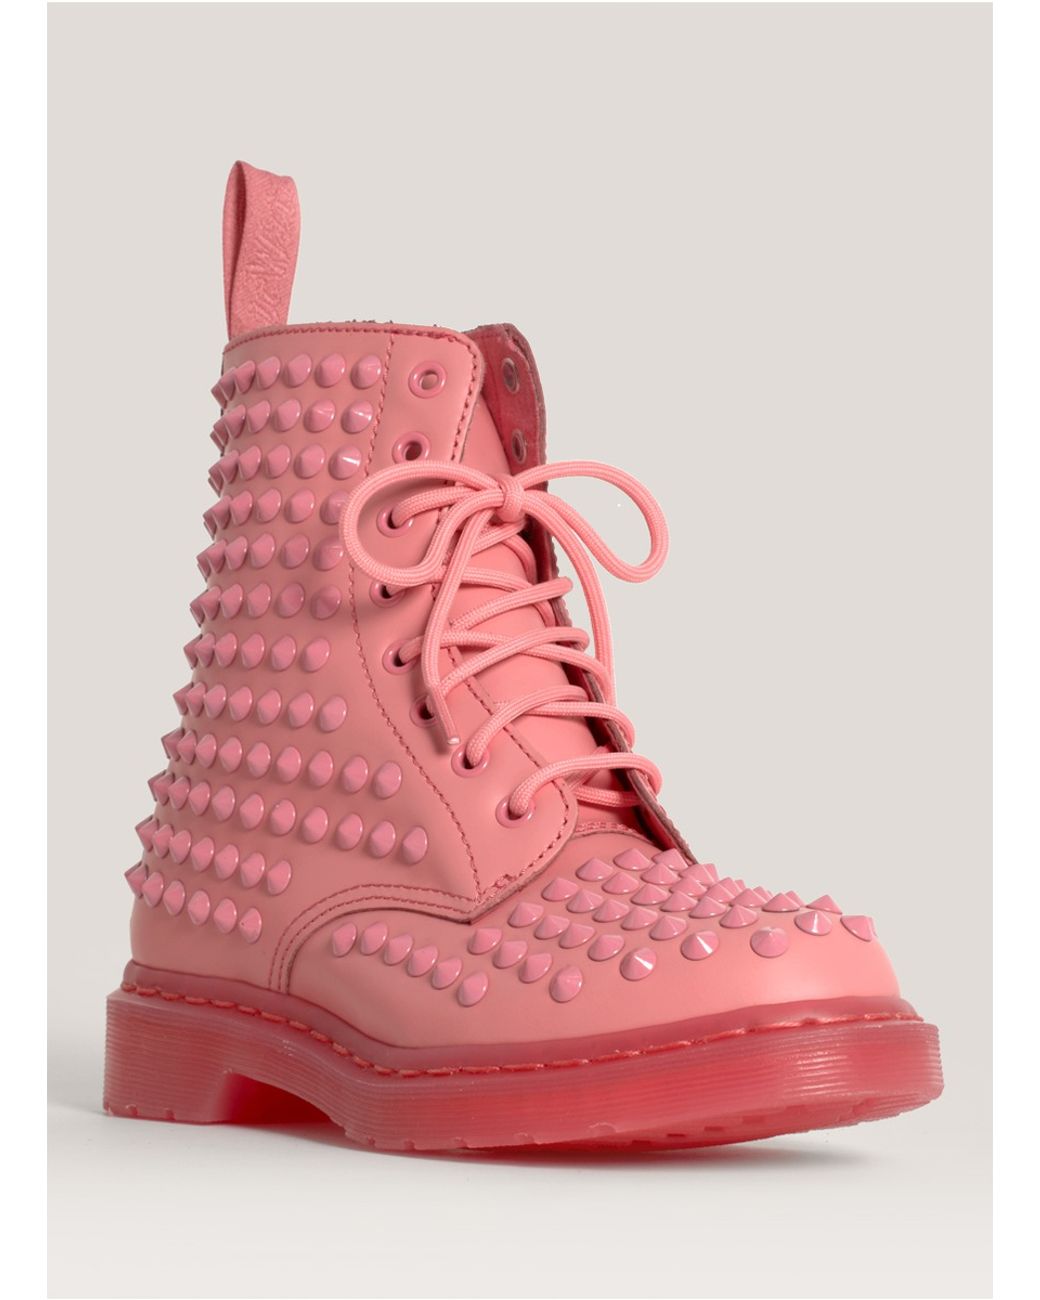 evitar Ahorro Romance Dr. Martens Spike Studded Lace-up Boots in Pink | Lyst